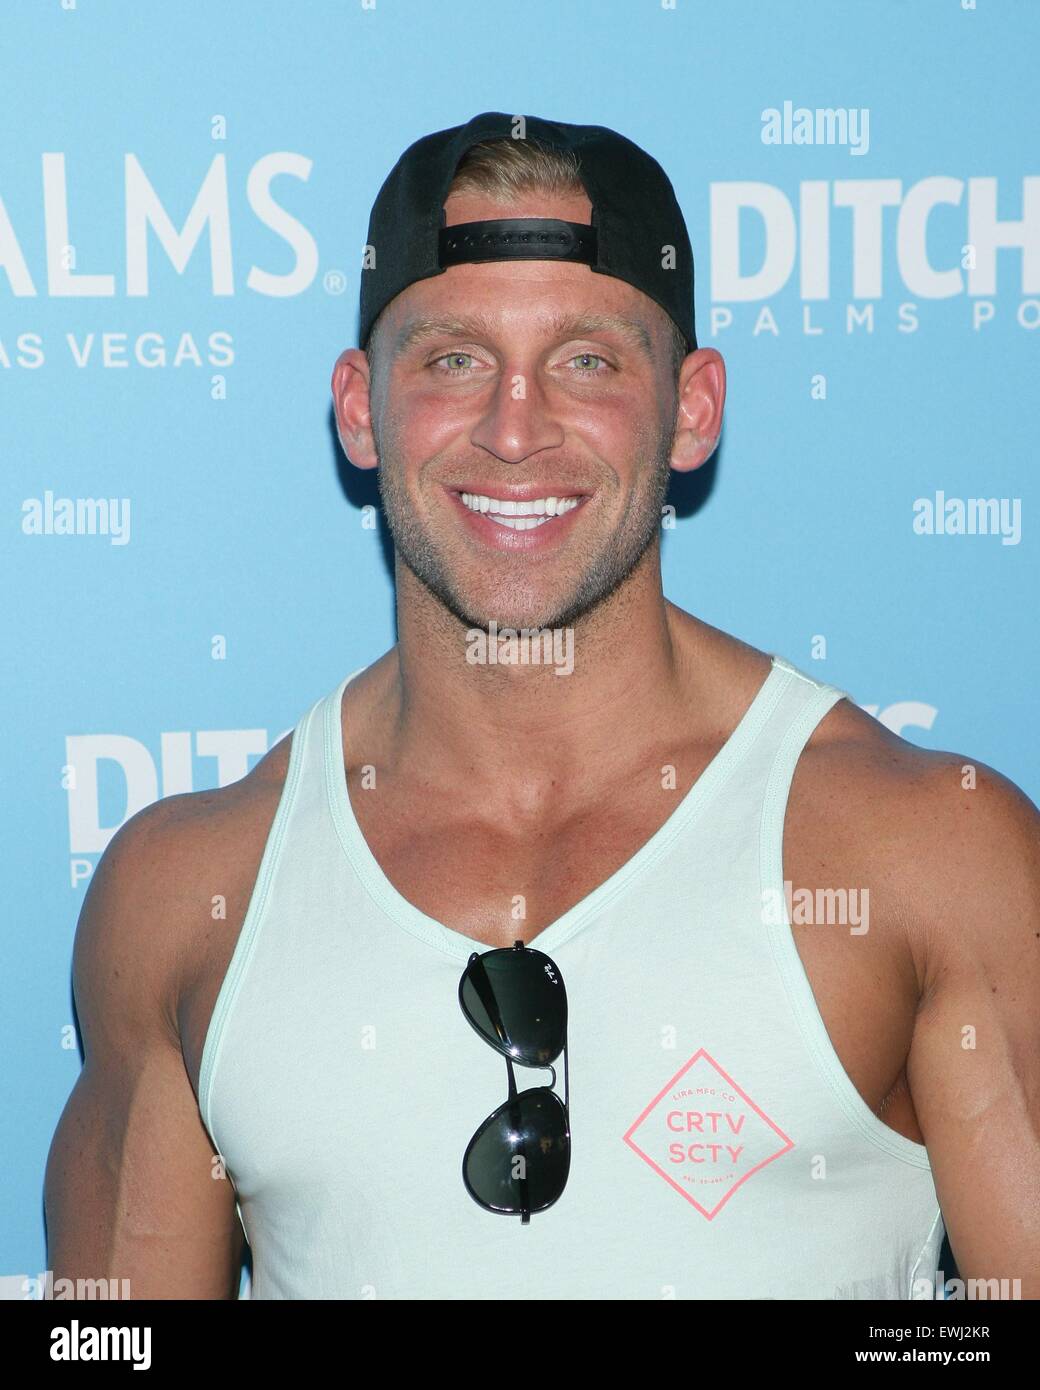 Las Vegas, NV, USA. 26th June, 2015. Cody Sattler at arrivals for Reality TV Stars from ABC's THE BACHELOR IN PARADISE Host Ditch Fridays, Palms Pool & Dayclub, Las Vegas, NV June 26, 2015. Credit:  James Atoa/Everett Collection/Alamy Live News Stock Photo